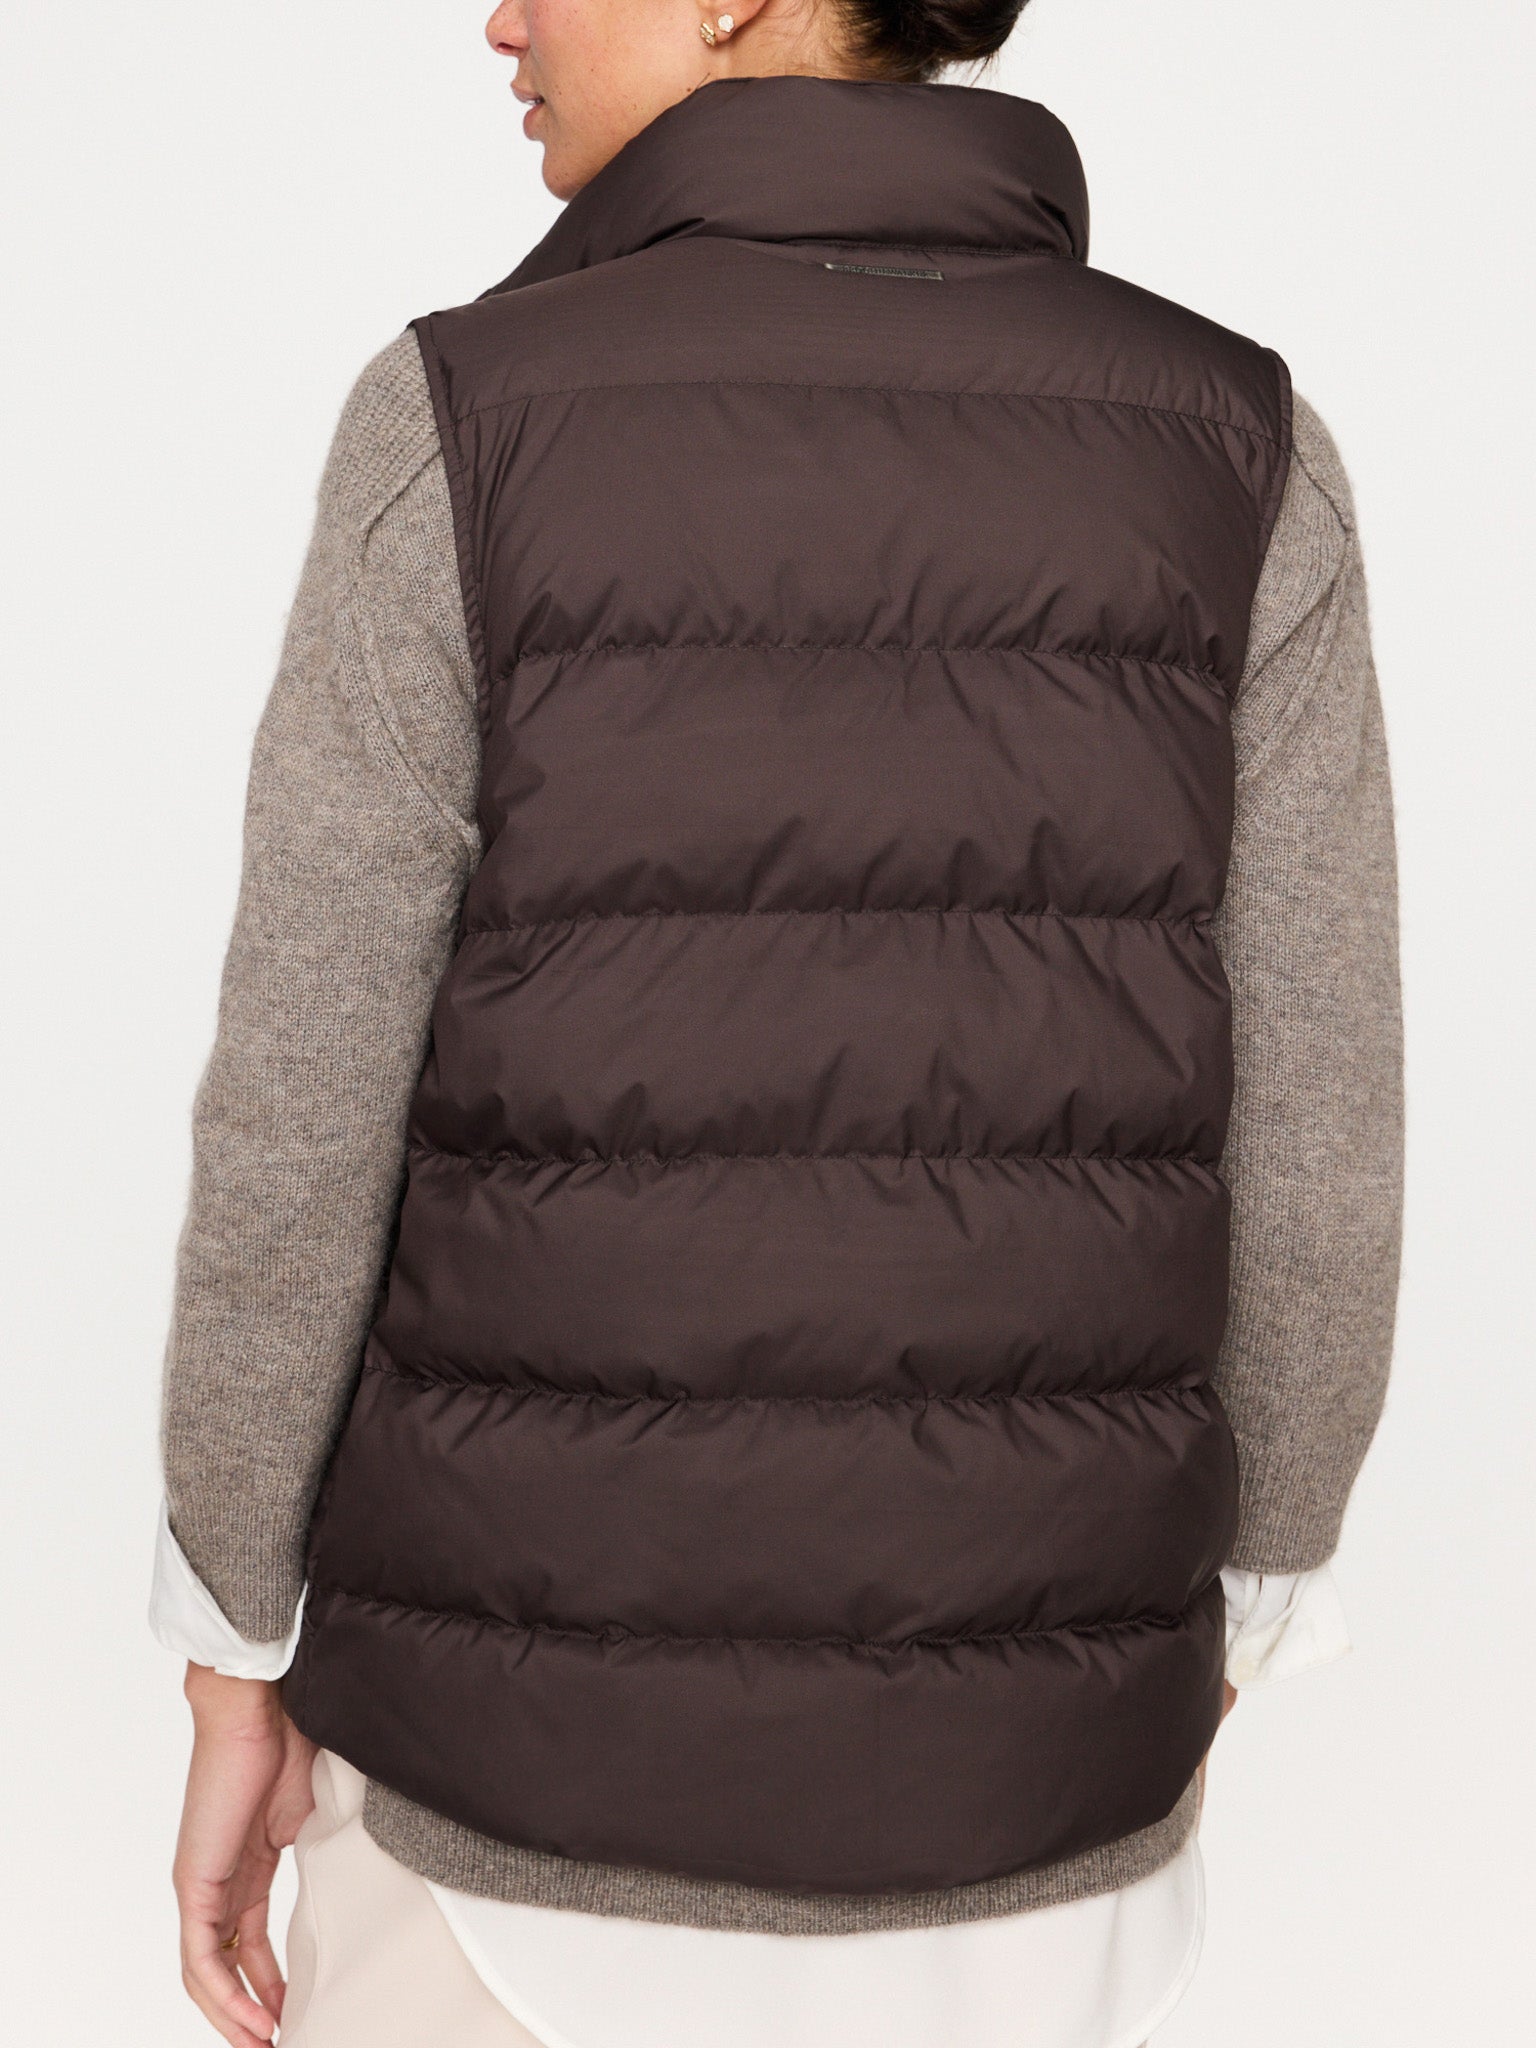 The Anders Down Vest